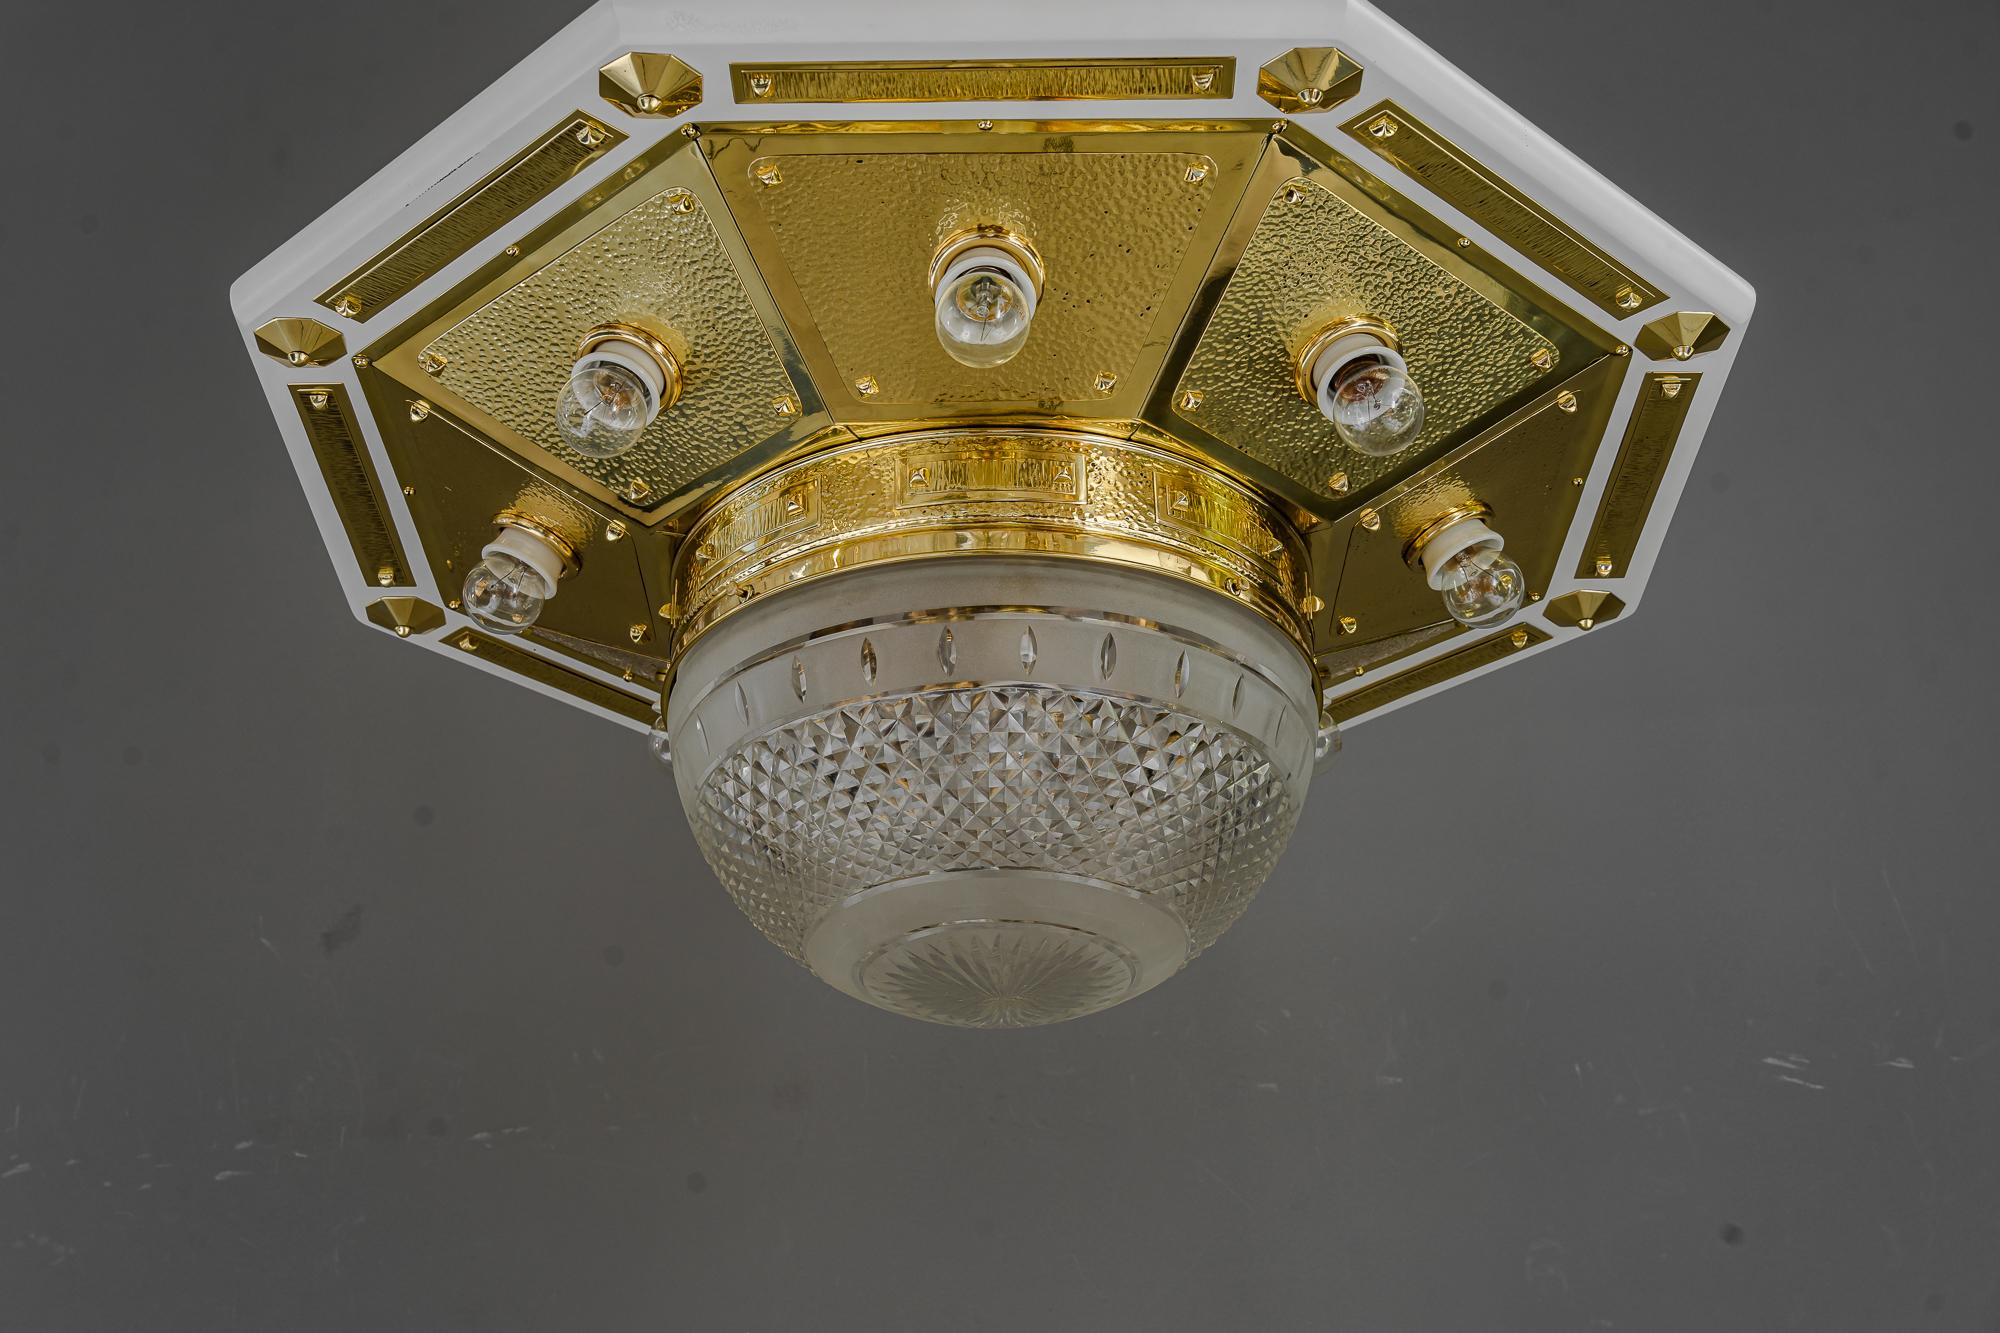 Very big octagon art deco ceiling lamp vienna around 1920s
Brass polished and stove enameled.